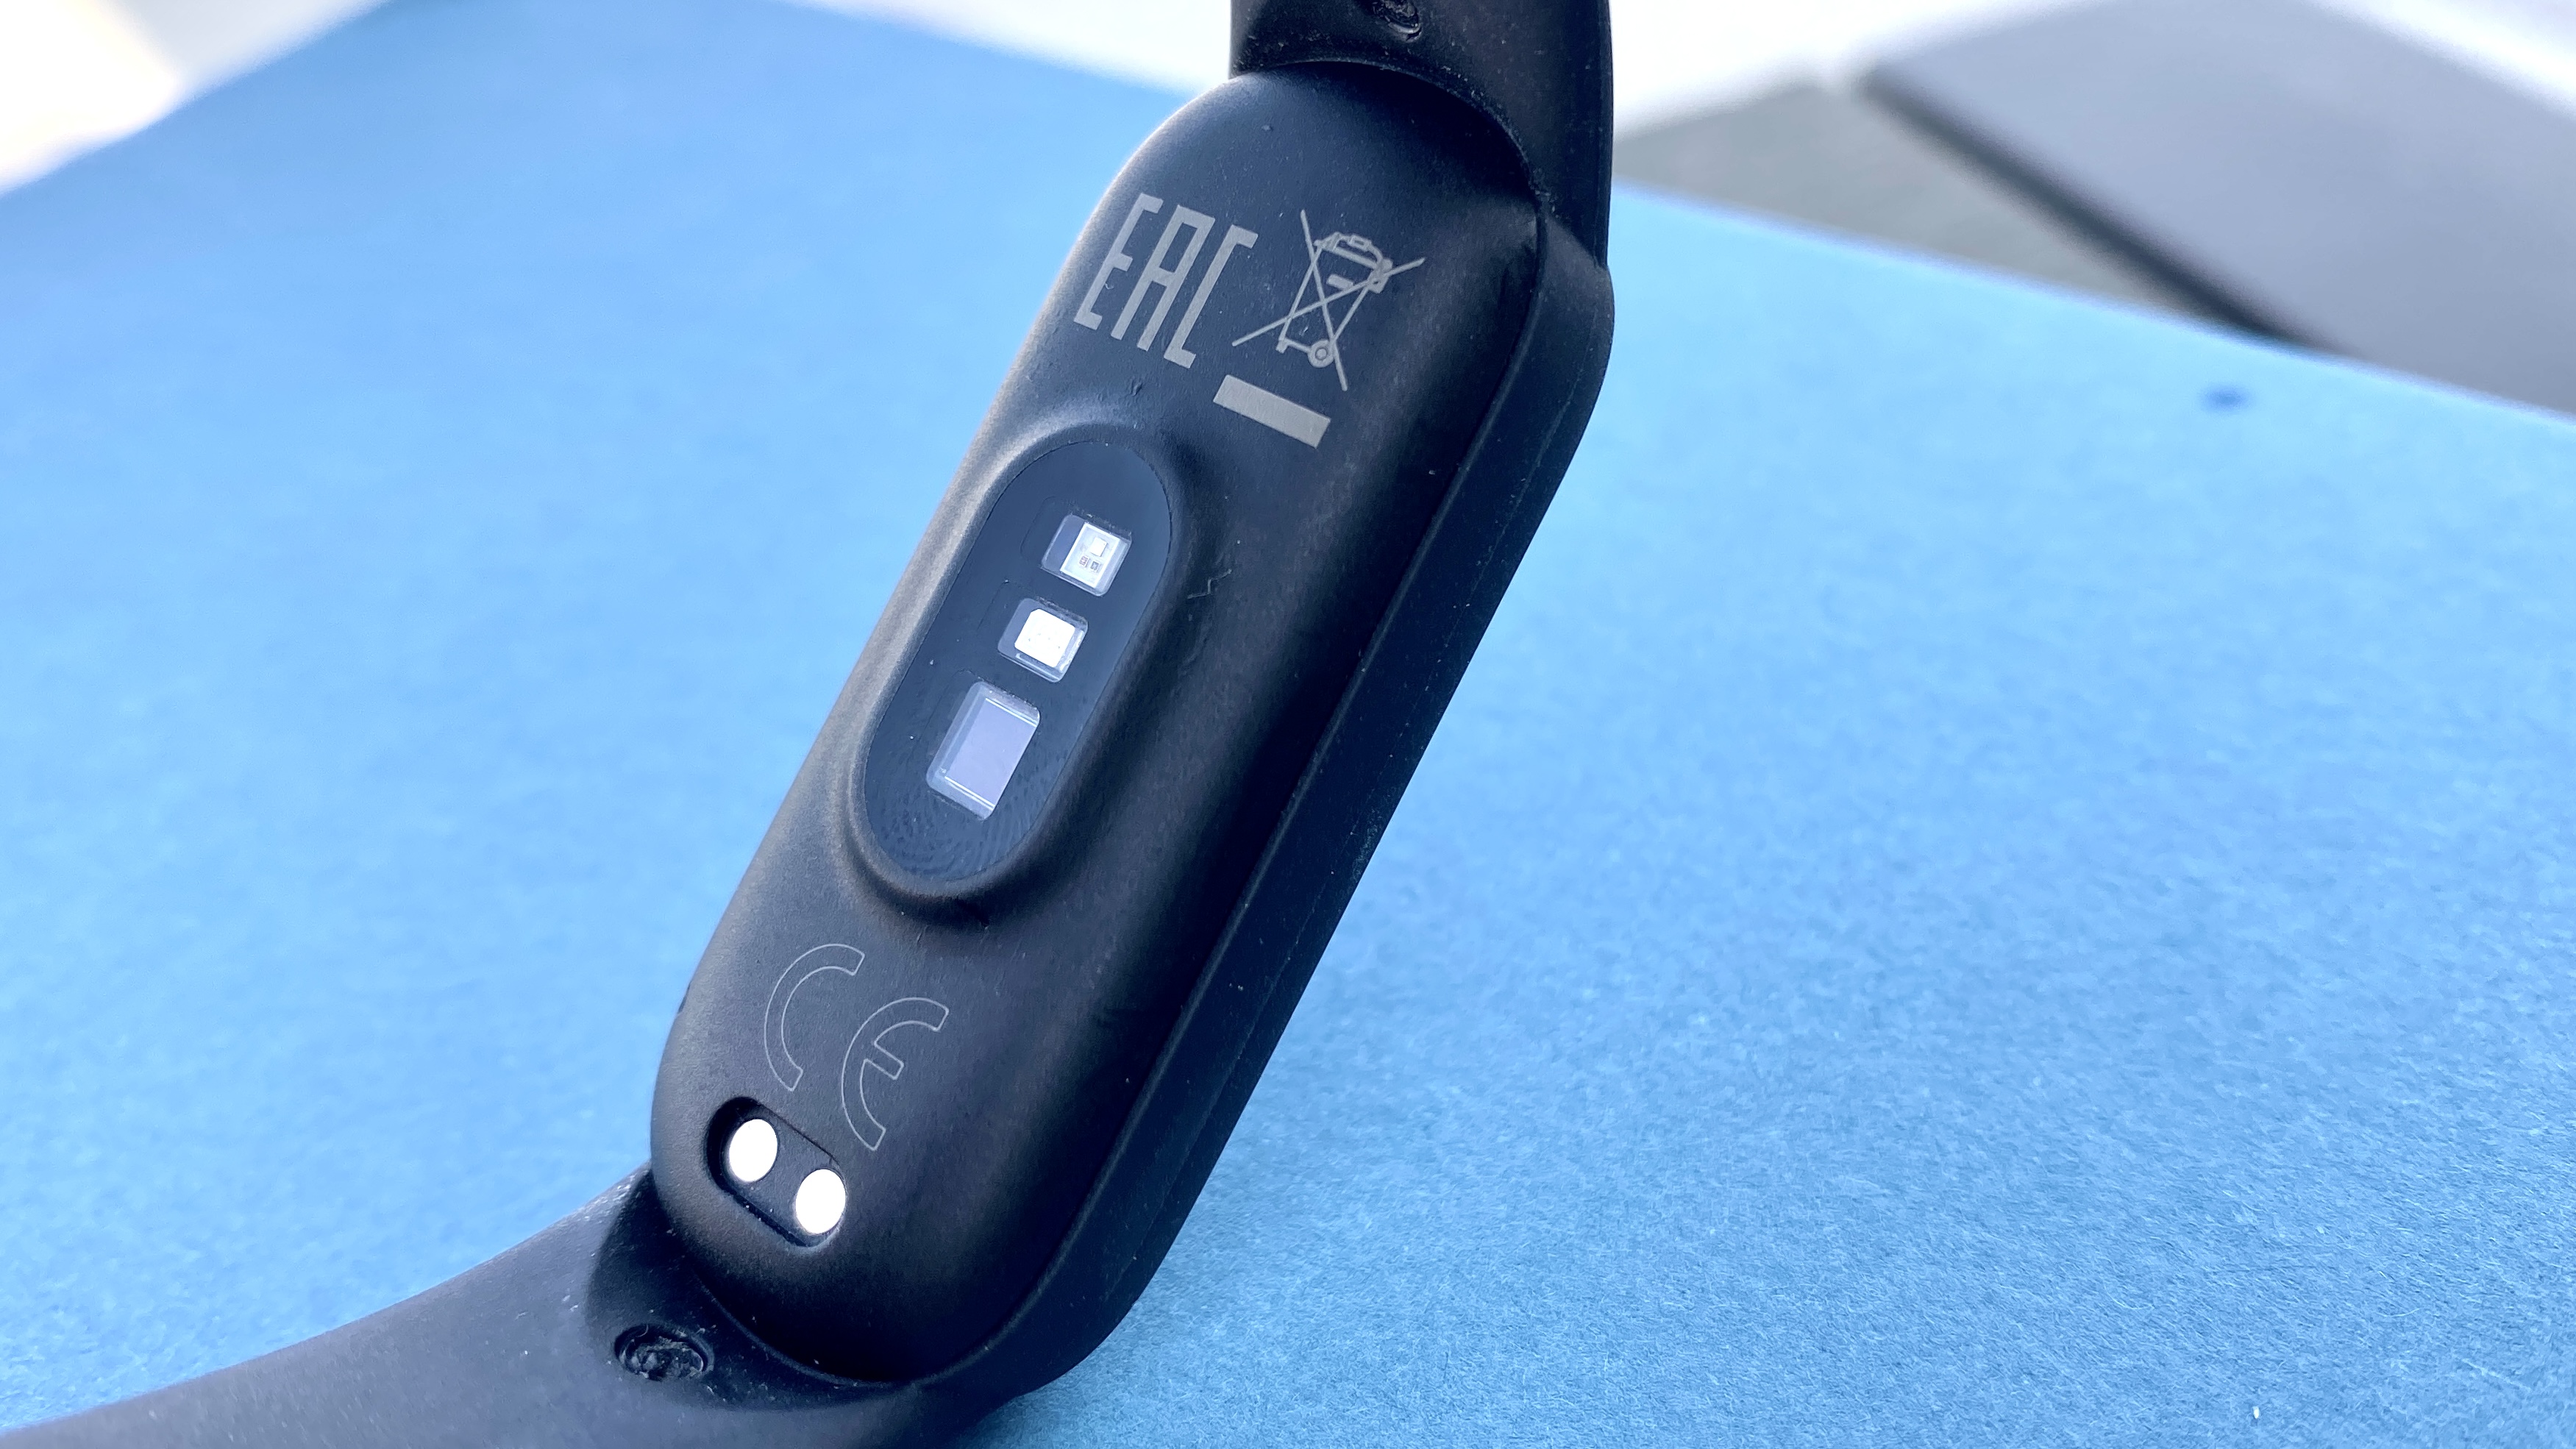 Amazfit Band 5 review